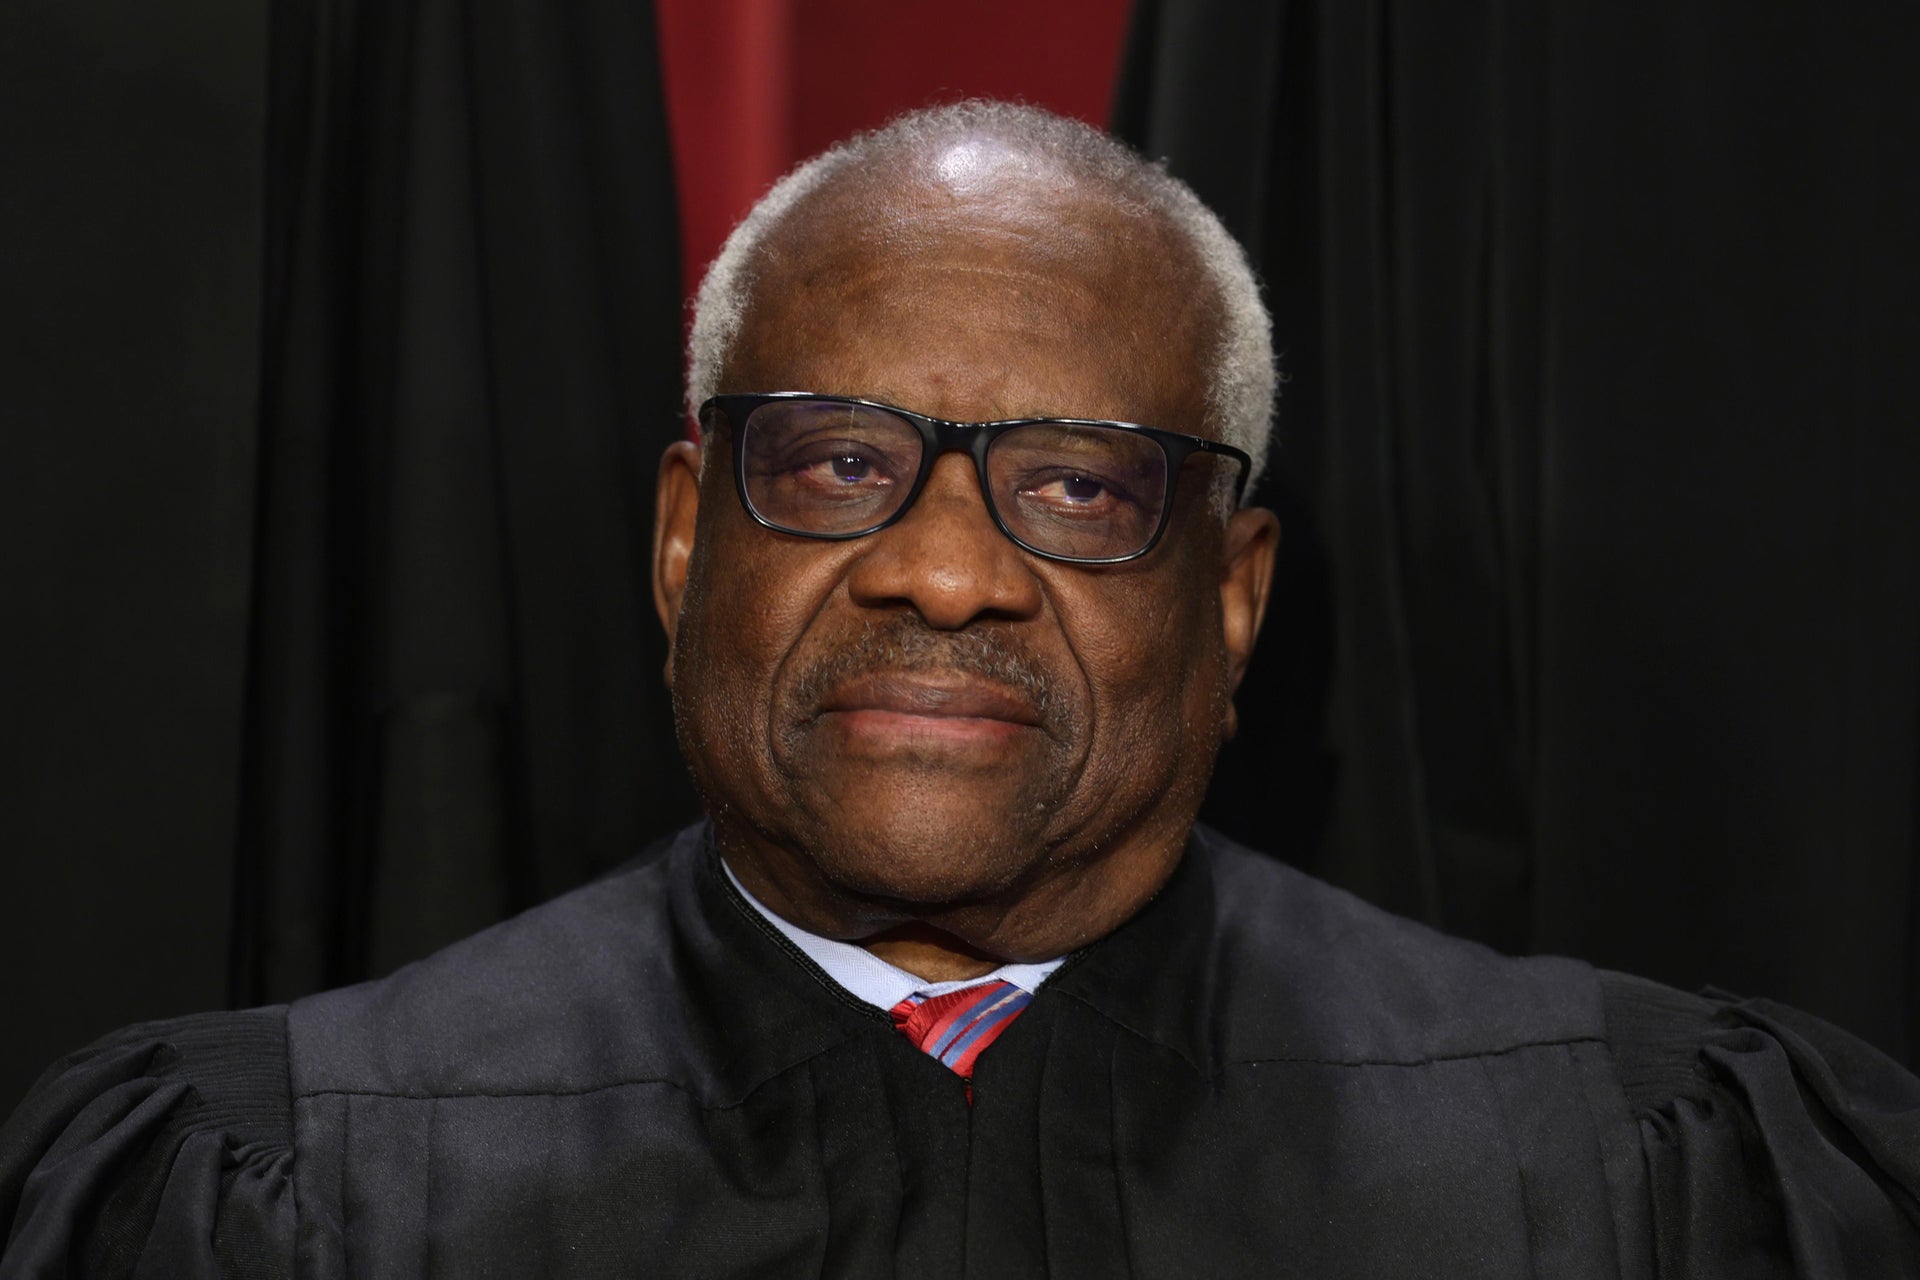 CORRUPTION: Clarence Thomas’s Mom Definitely Still Lives in the House the Billionaire Bought (slate.com)